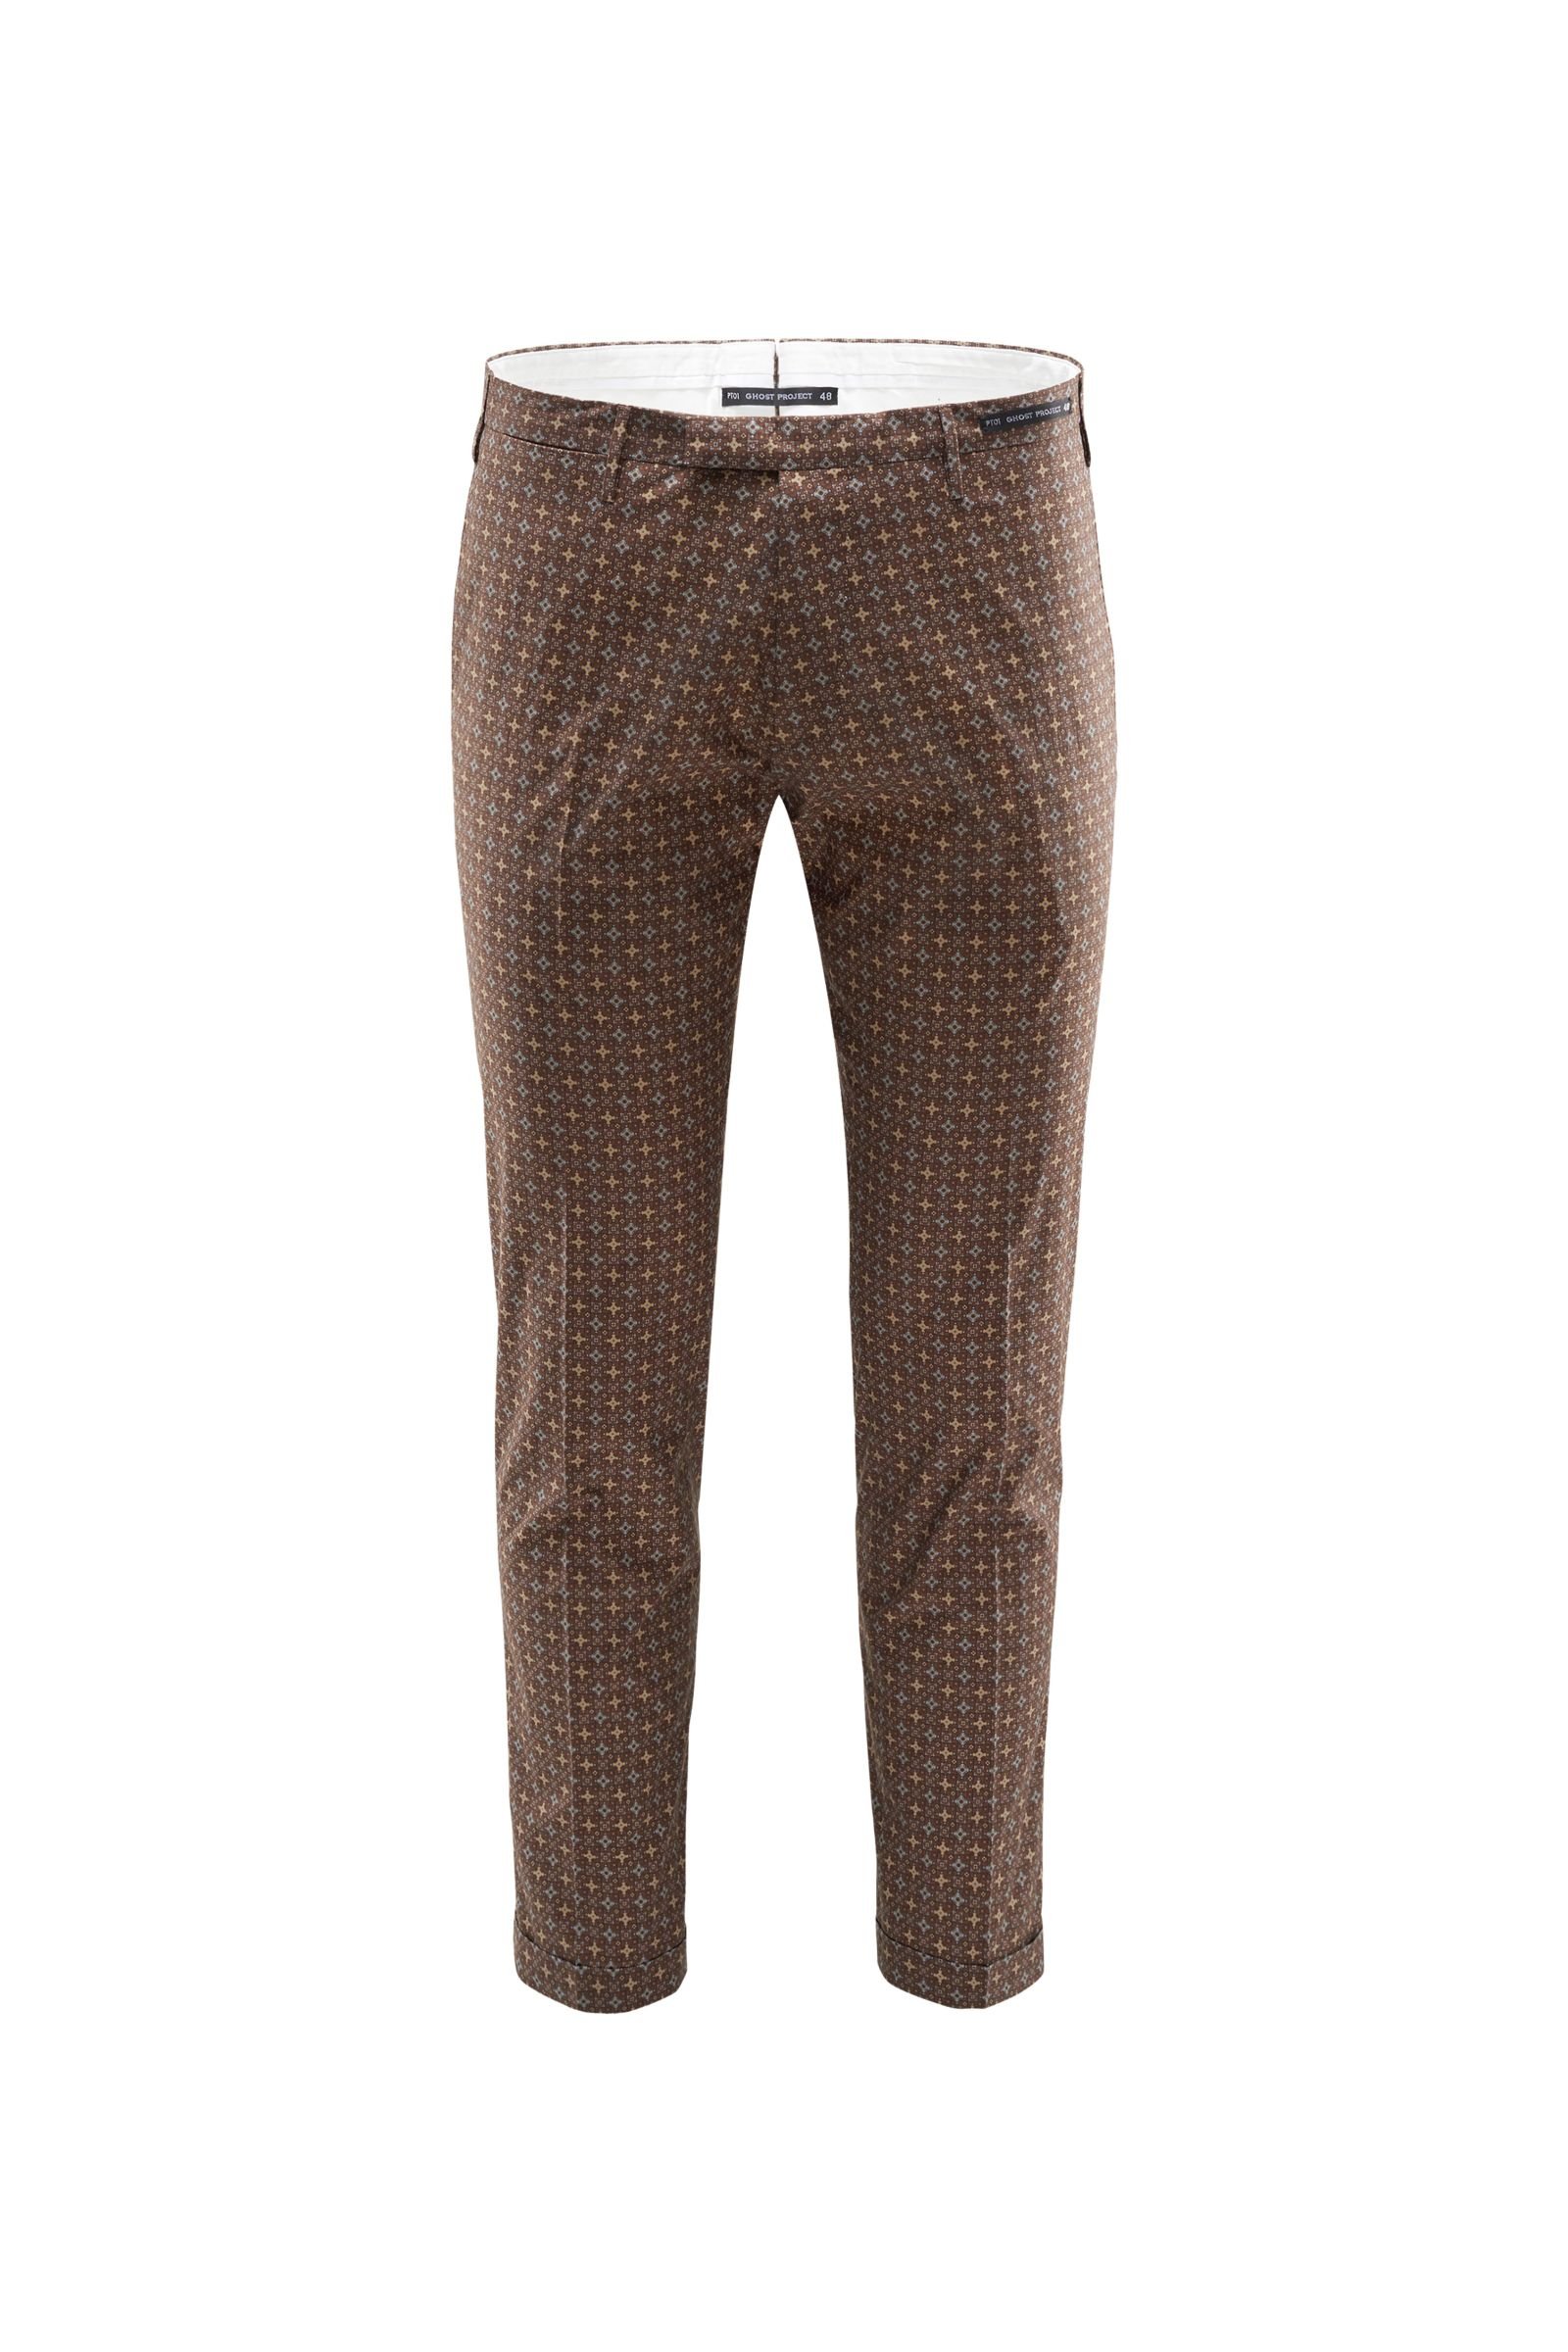 Cotton trousers 'Shade Regular Fit' brown patterned